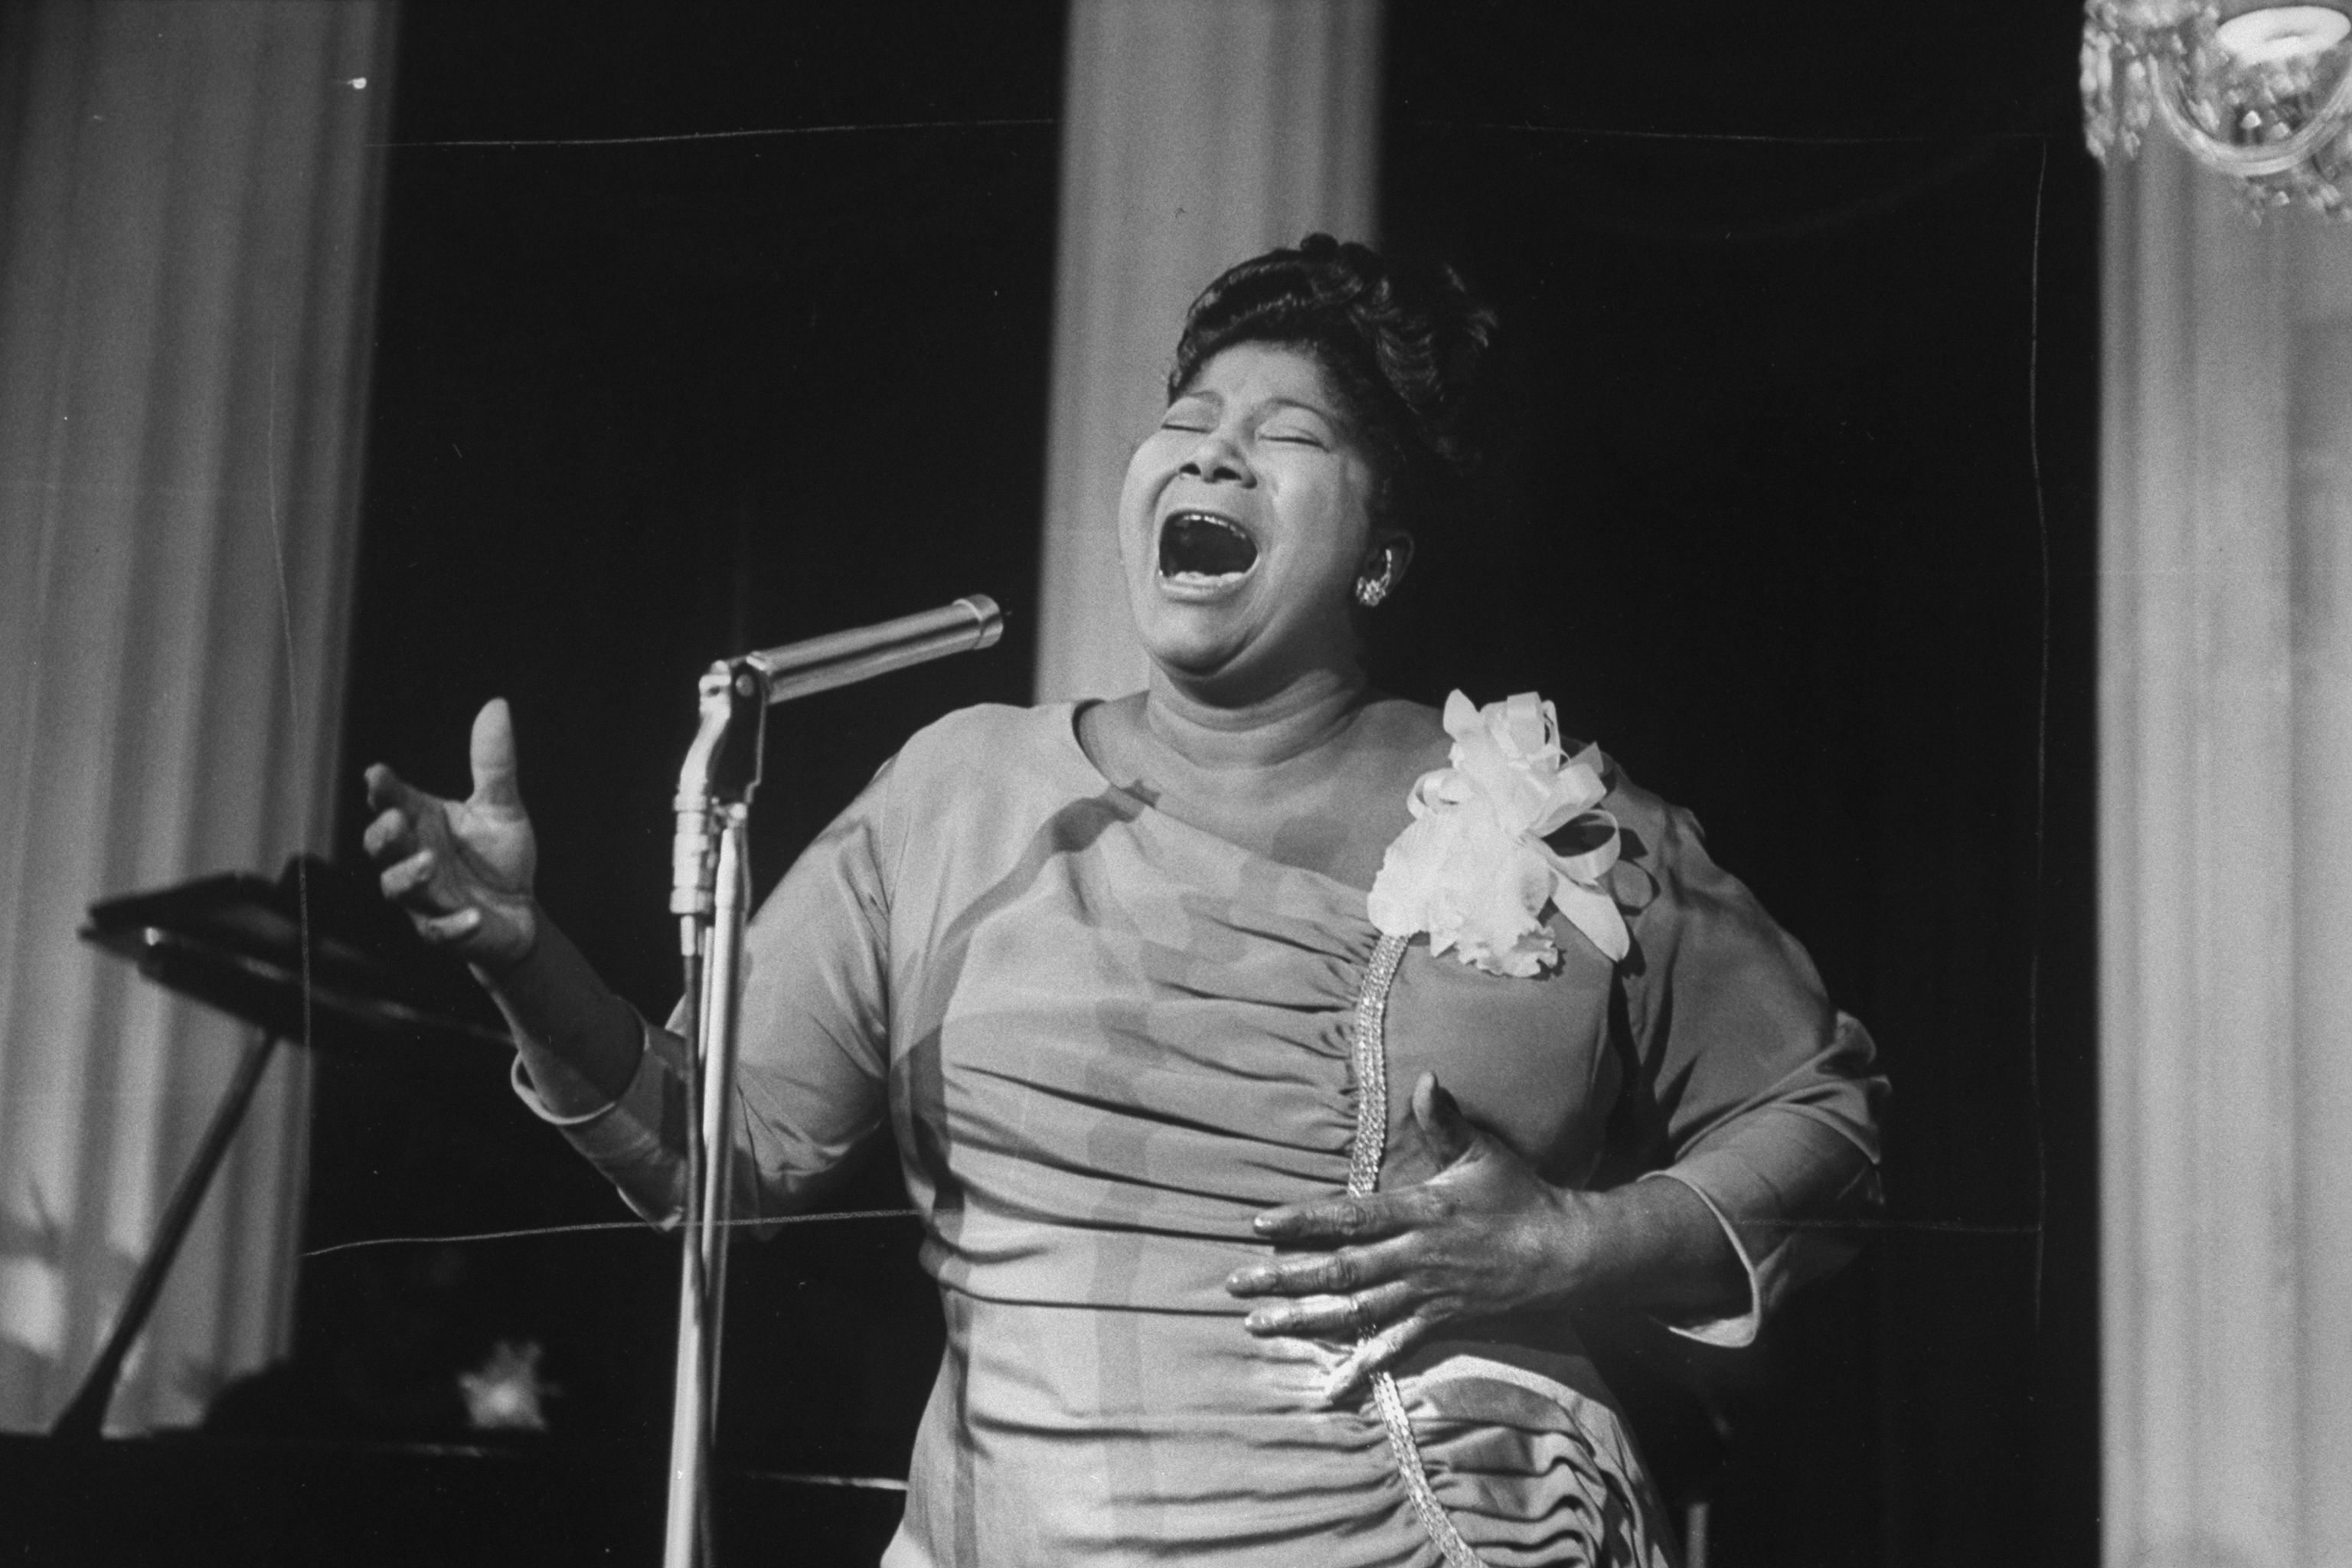 Mahalia Jackson singing at a reception in a hotel on March 01, 1961 | Photo: Getty Images